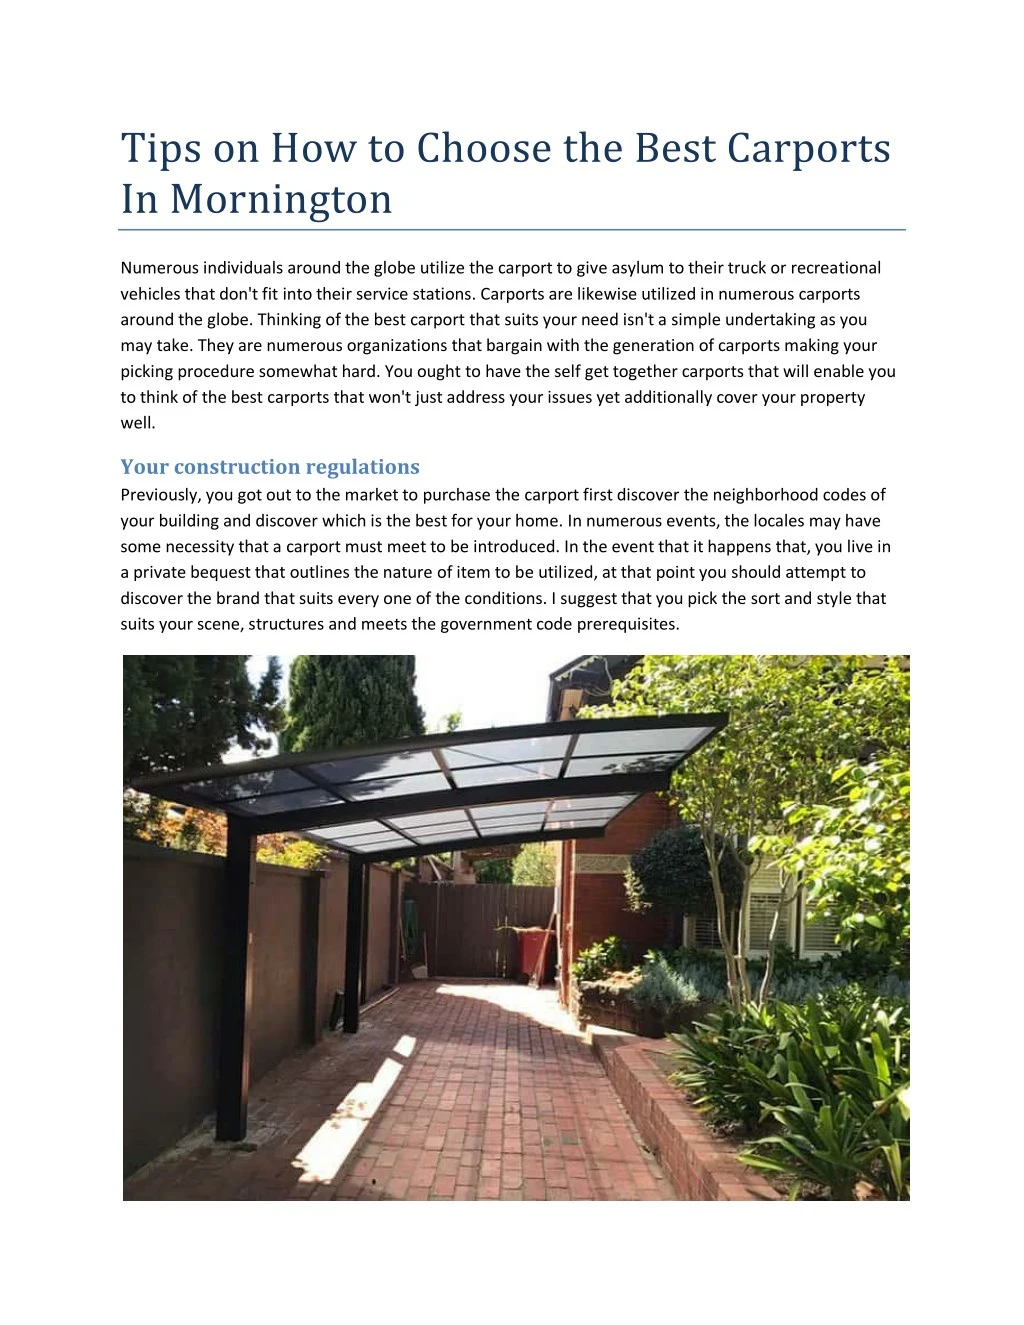 tips on how to choose the best carports